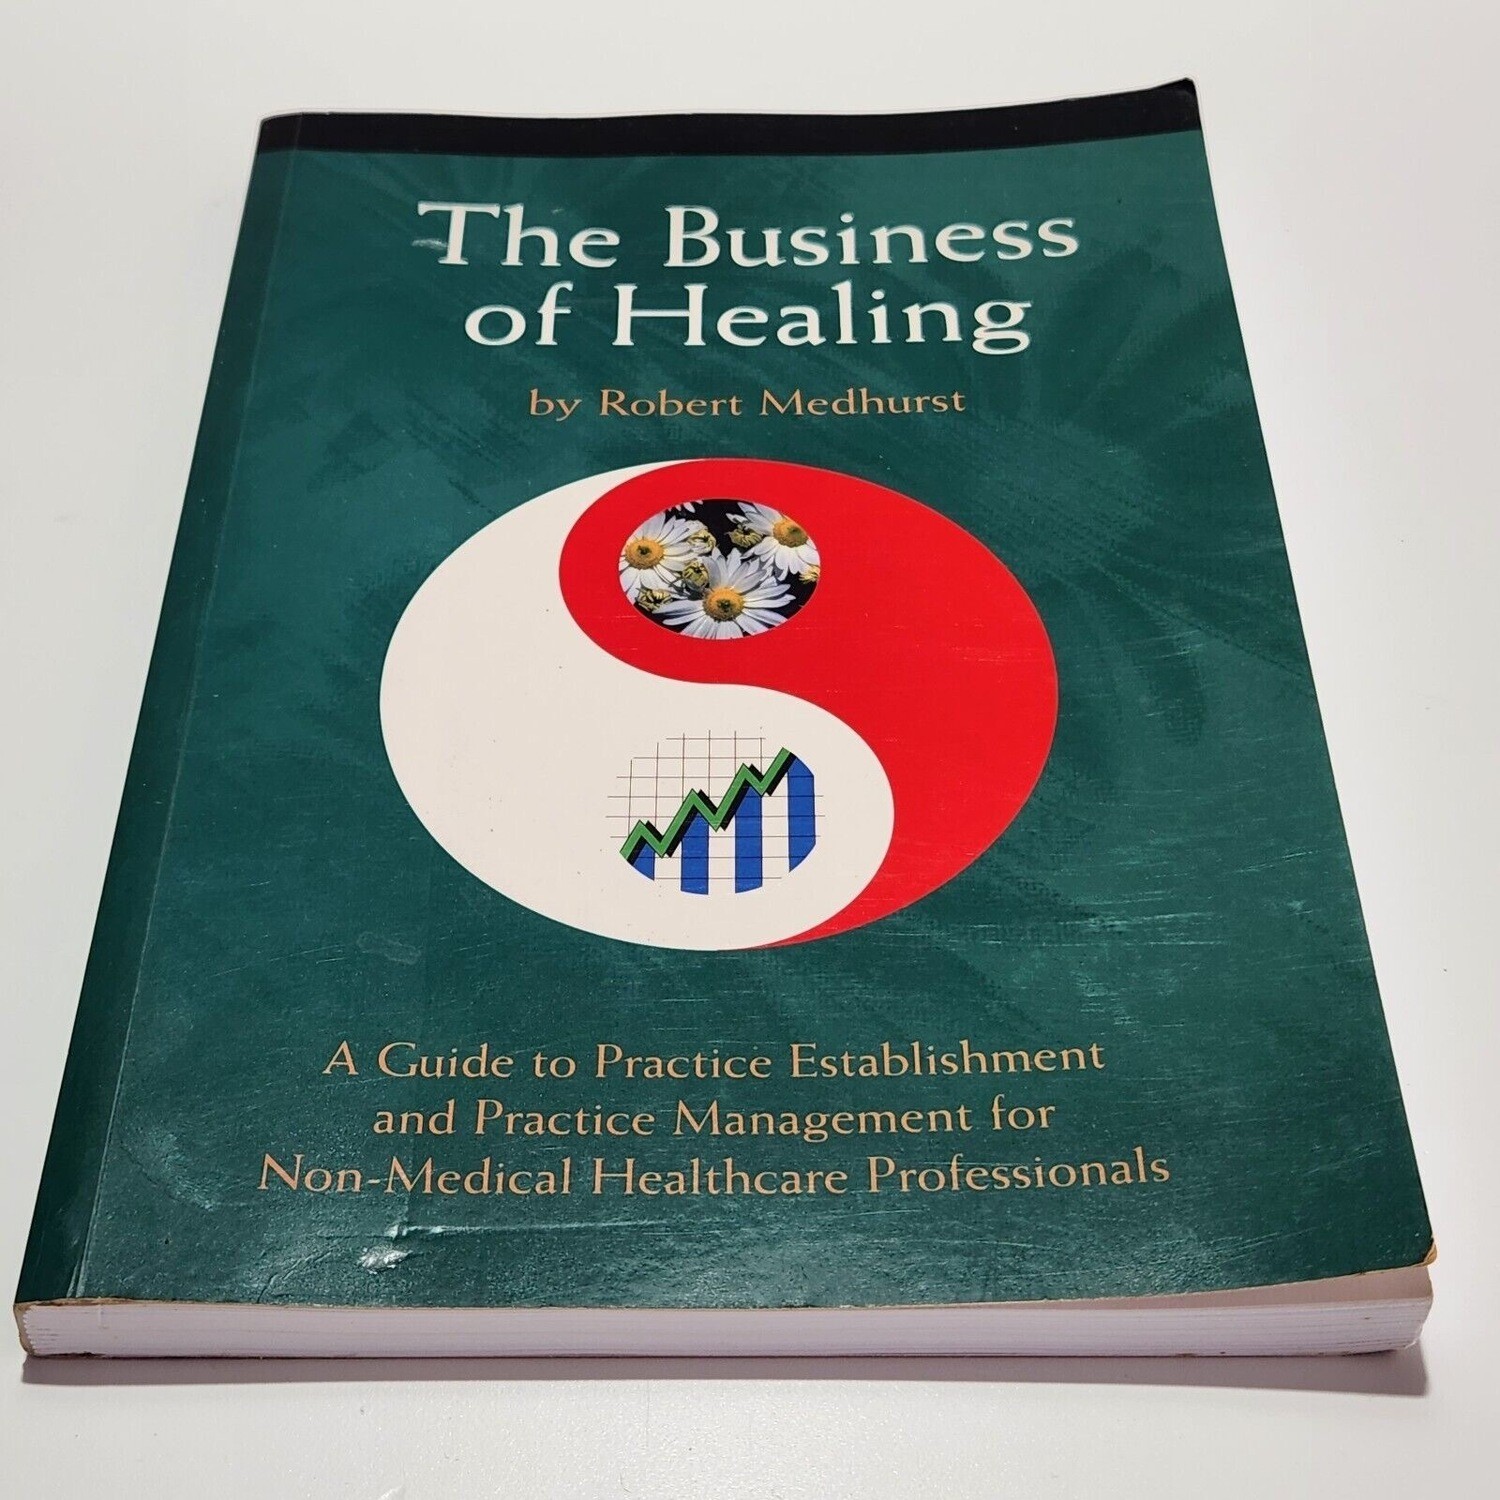 The Business of Healing - A Guide to Practice Establishment and Practice Management for Non-Medical Healthcare Professionals* (Medhurst)